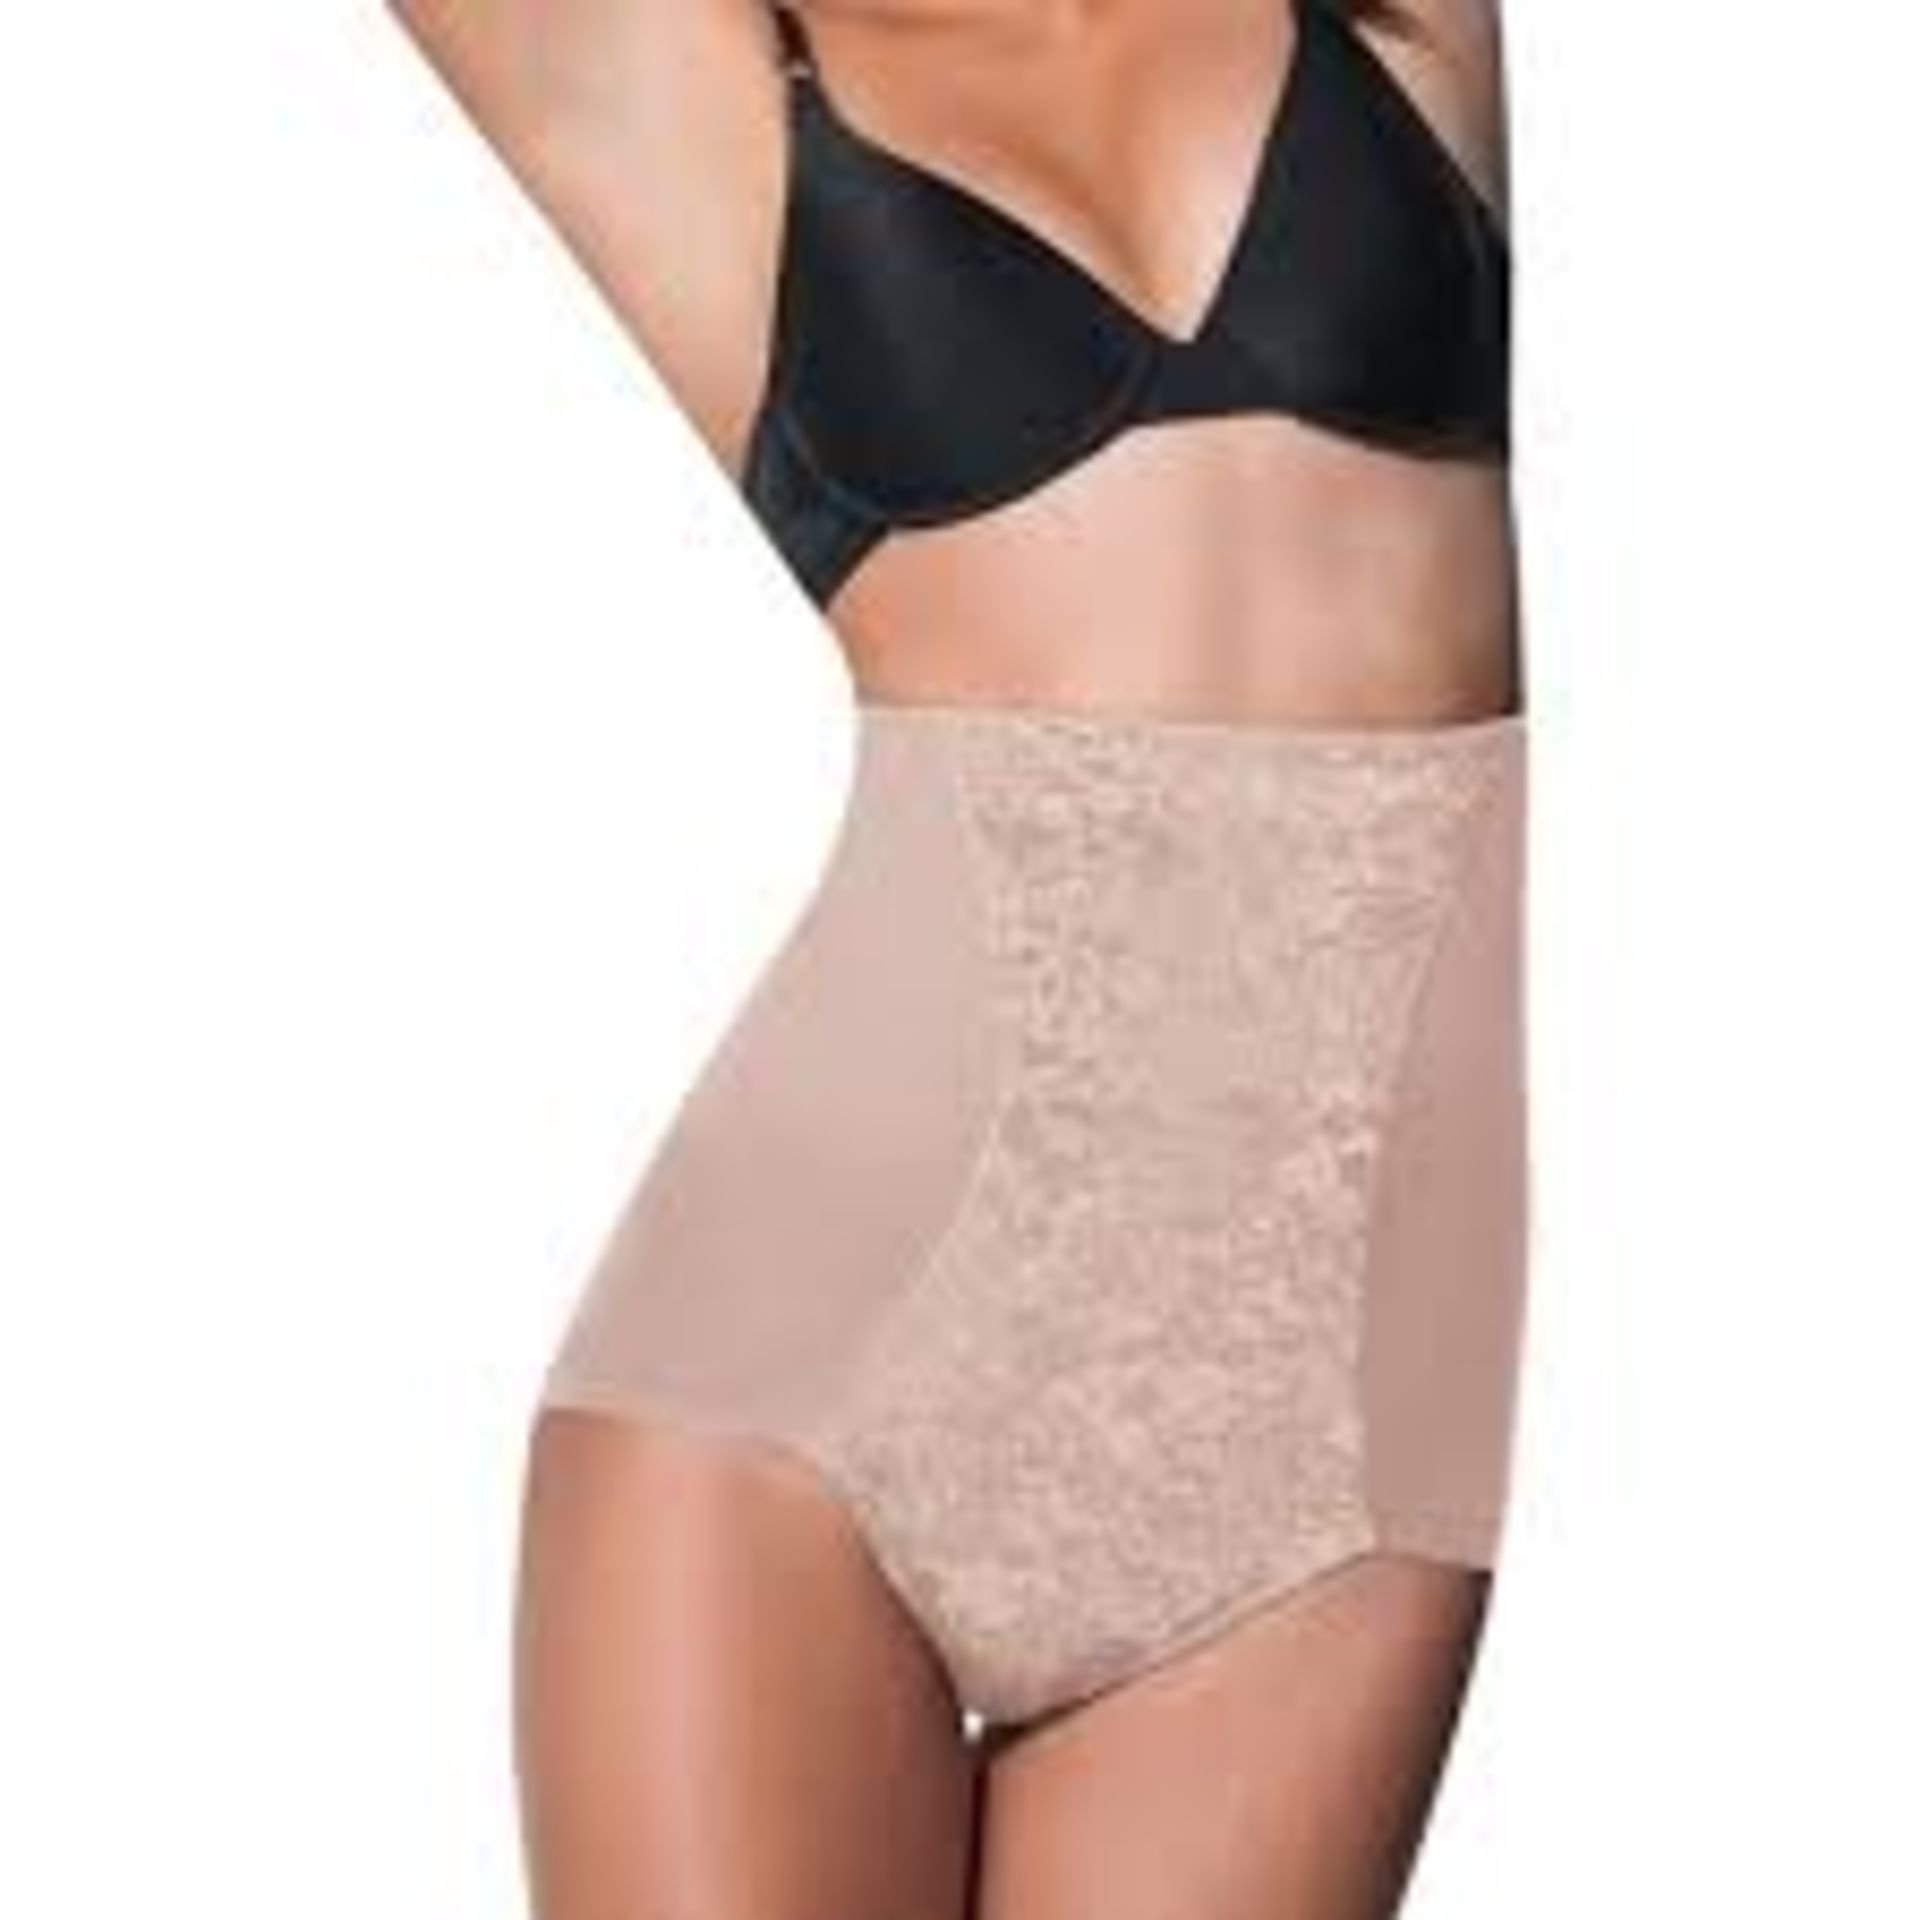 V Self Expressions Shapewear by Maidenform High Waist Brief Size L - nude colour, Couture Collection